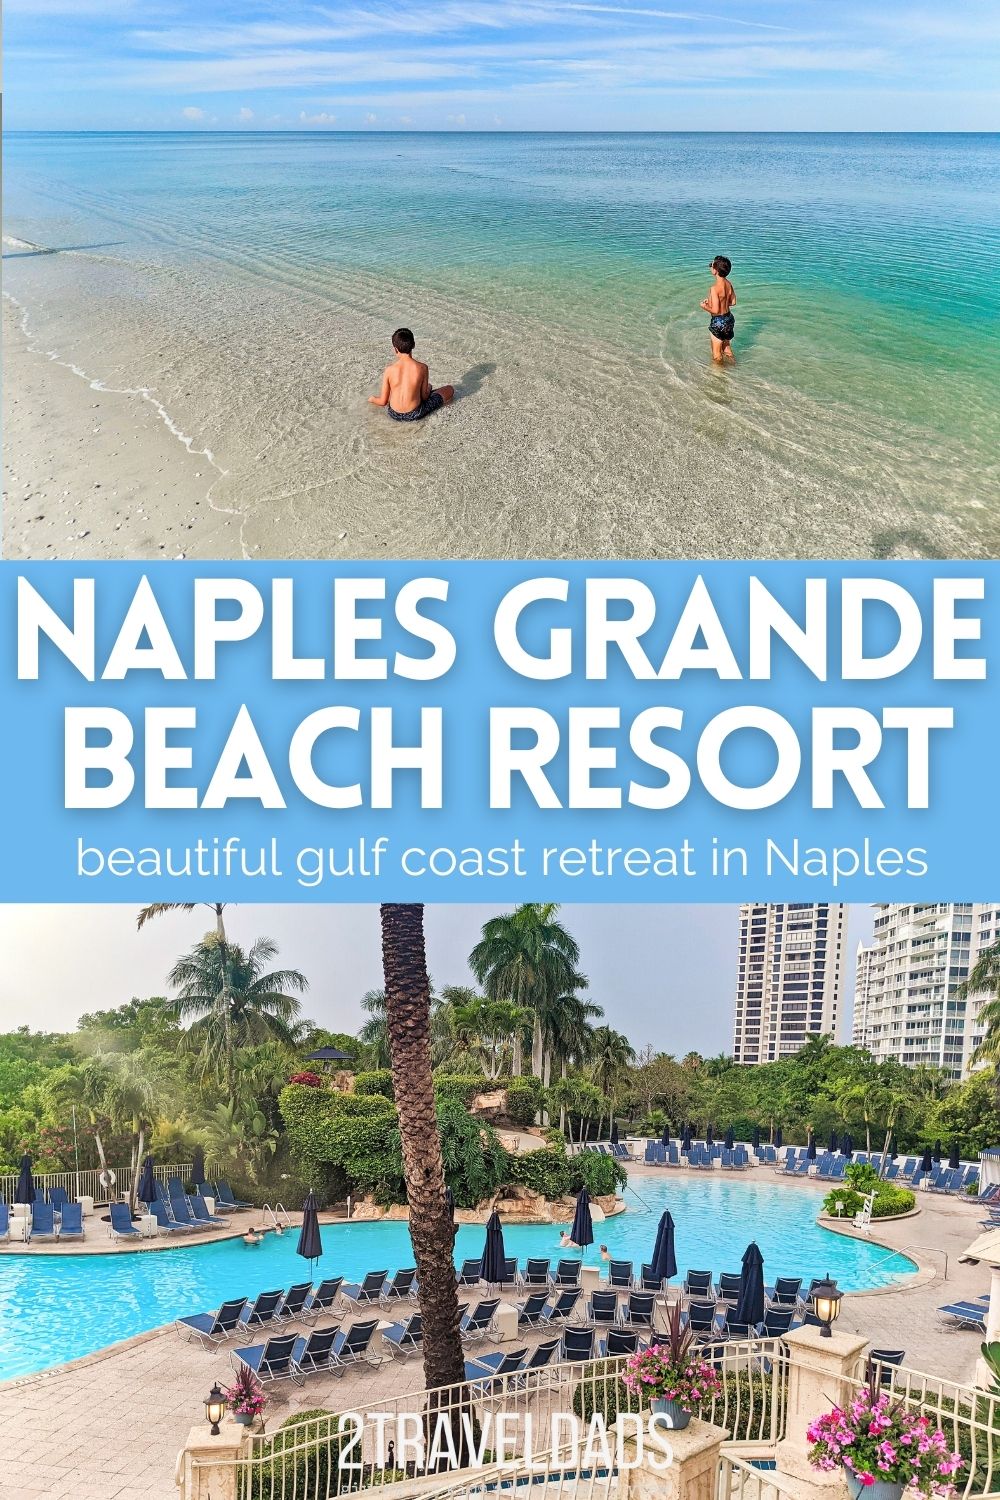 The Naples Grande Beach Resort is ideal for a Gulf Coast trip, located just off the beach with paddling, pools and more directly at the property. Complete beach resort review with tips for planning a trip to Naples, Florida.